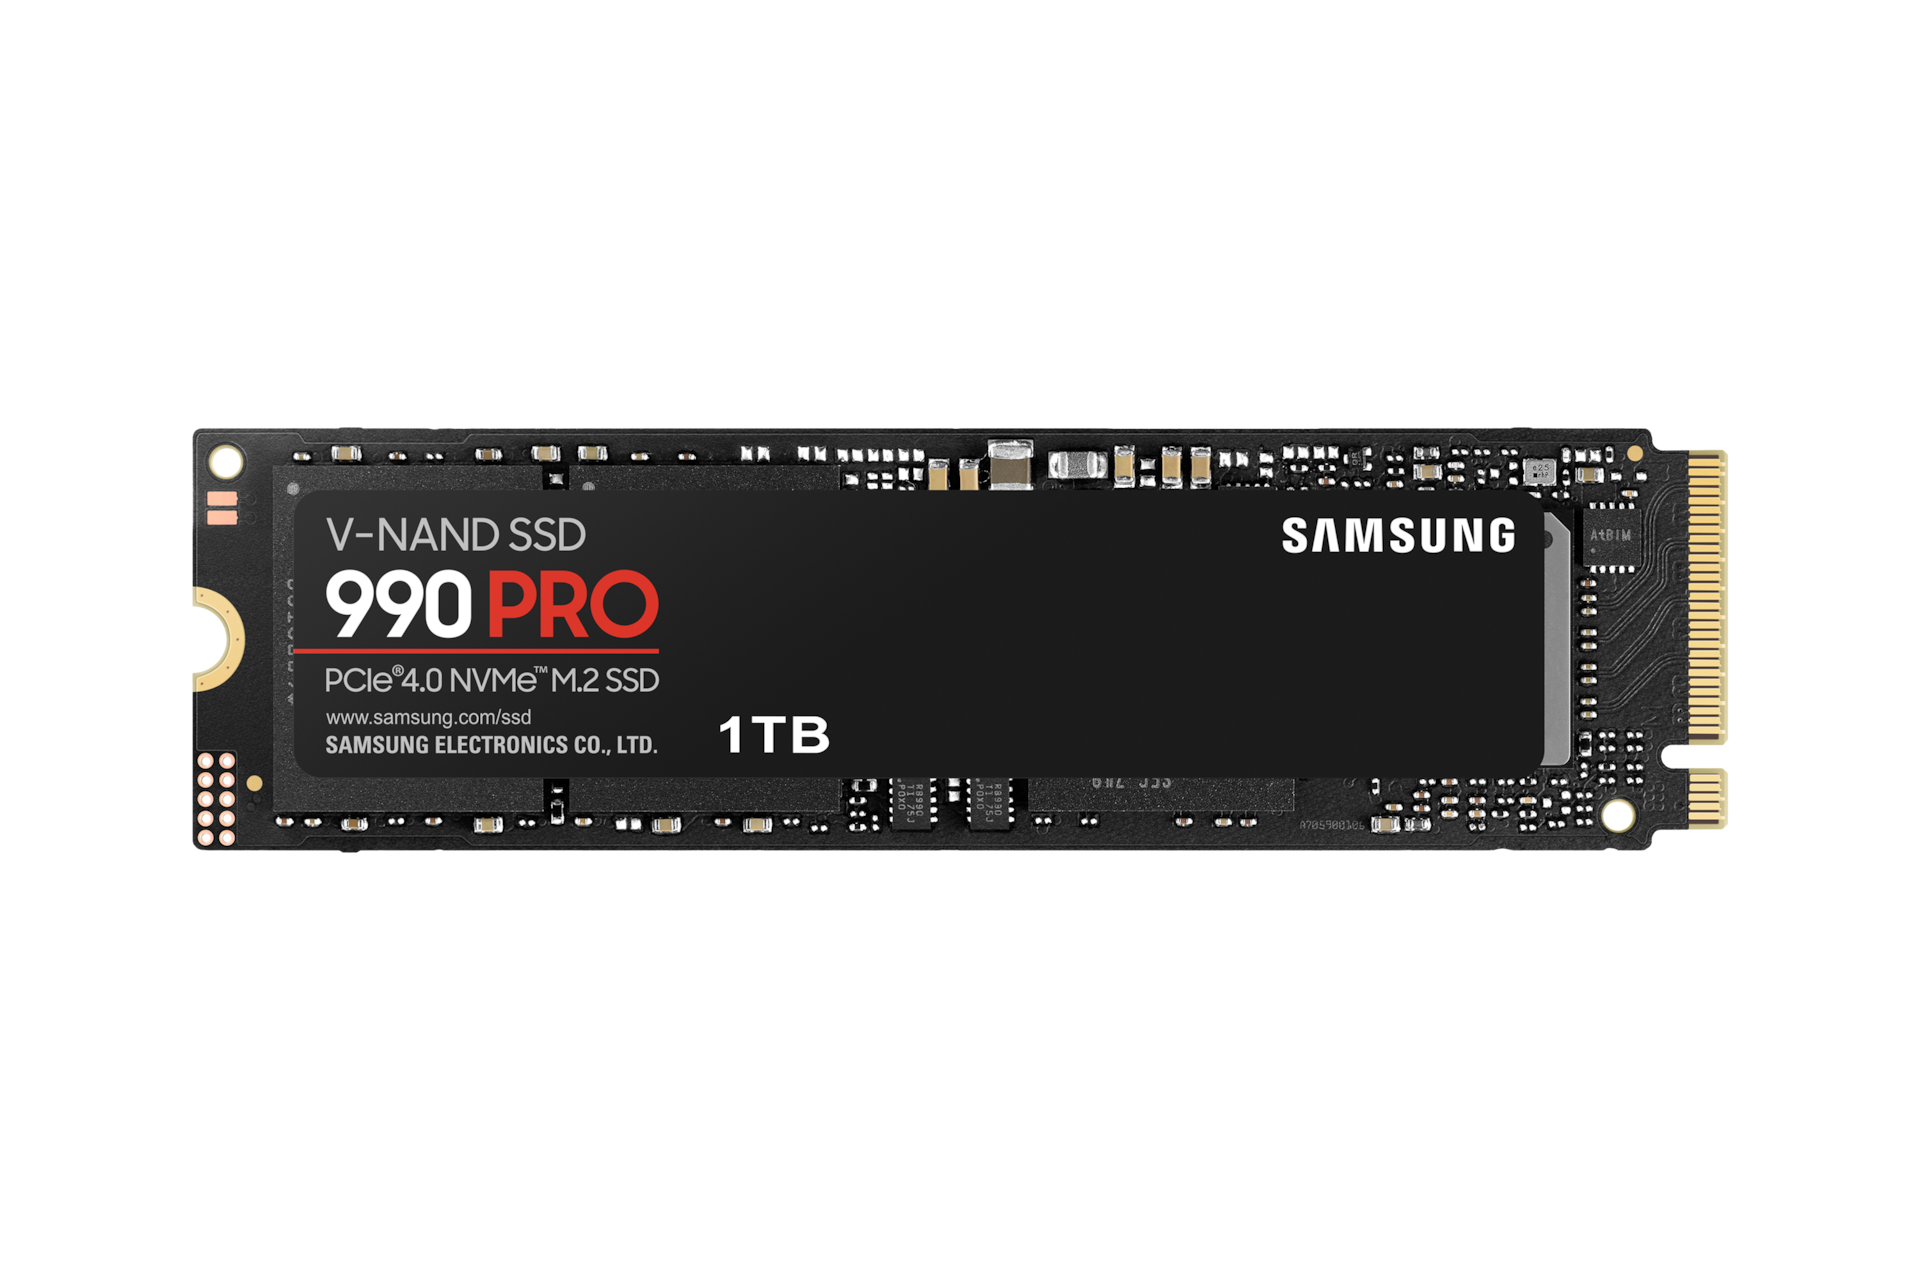 Image of Samsung 990 PRO PCIe 4.0 NVMe M.2 SSD